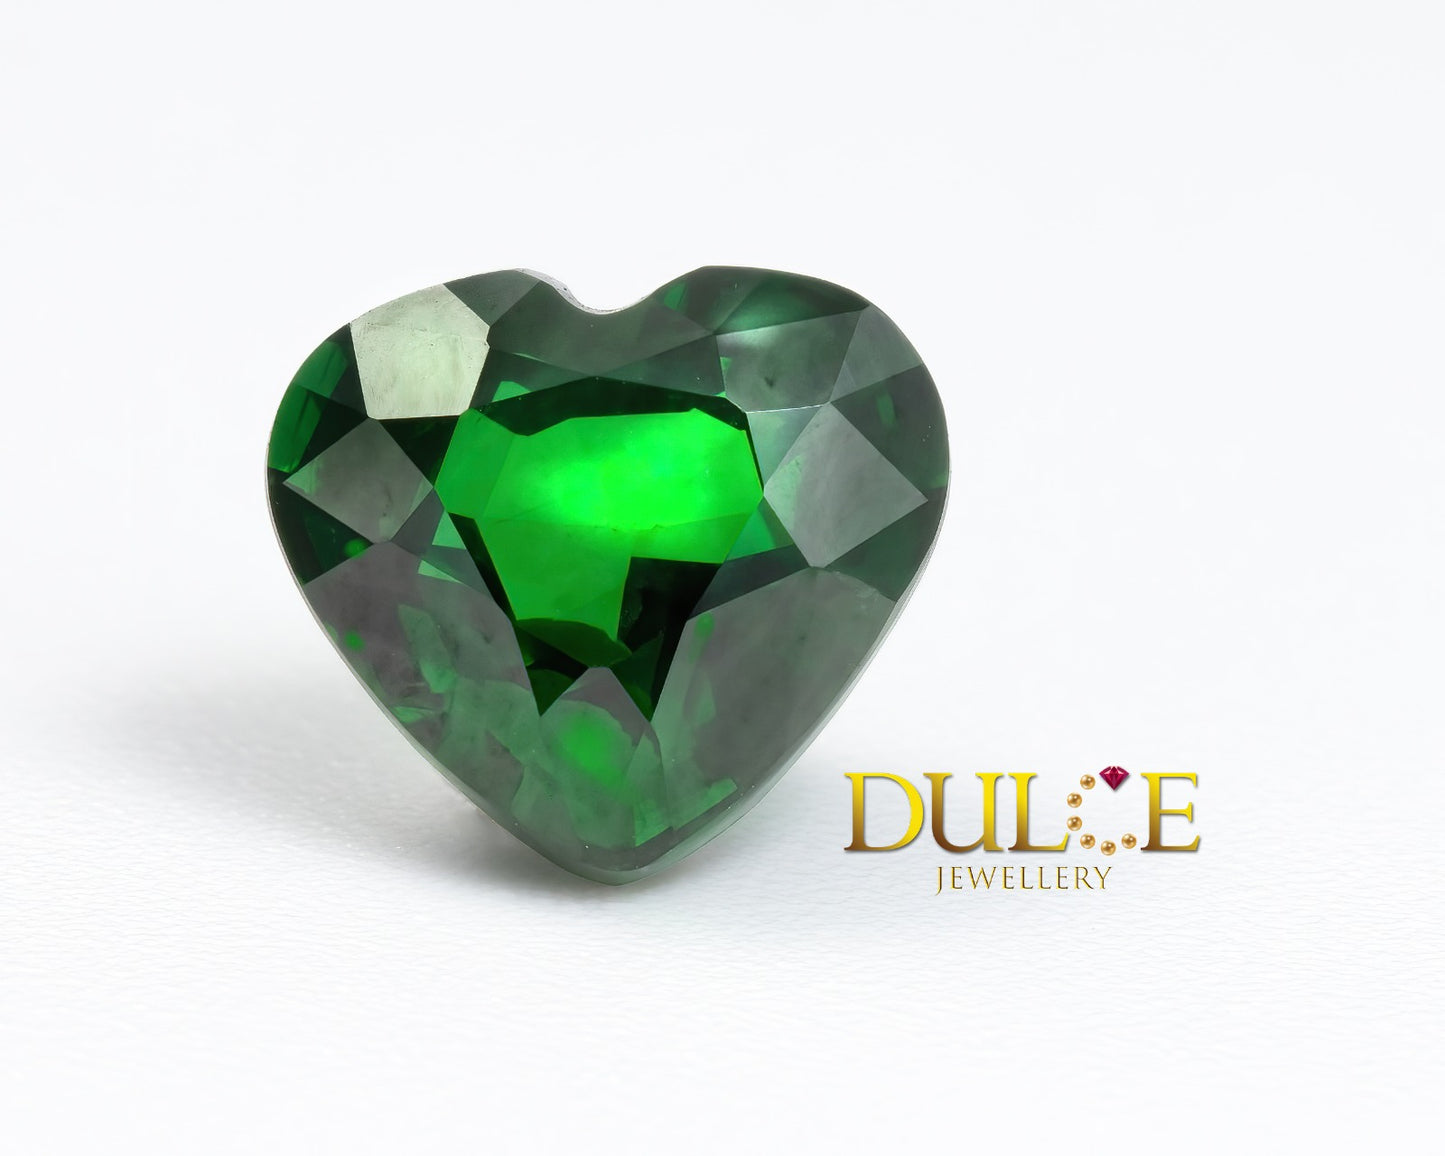 Green Sapphire (Price by Request)